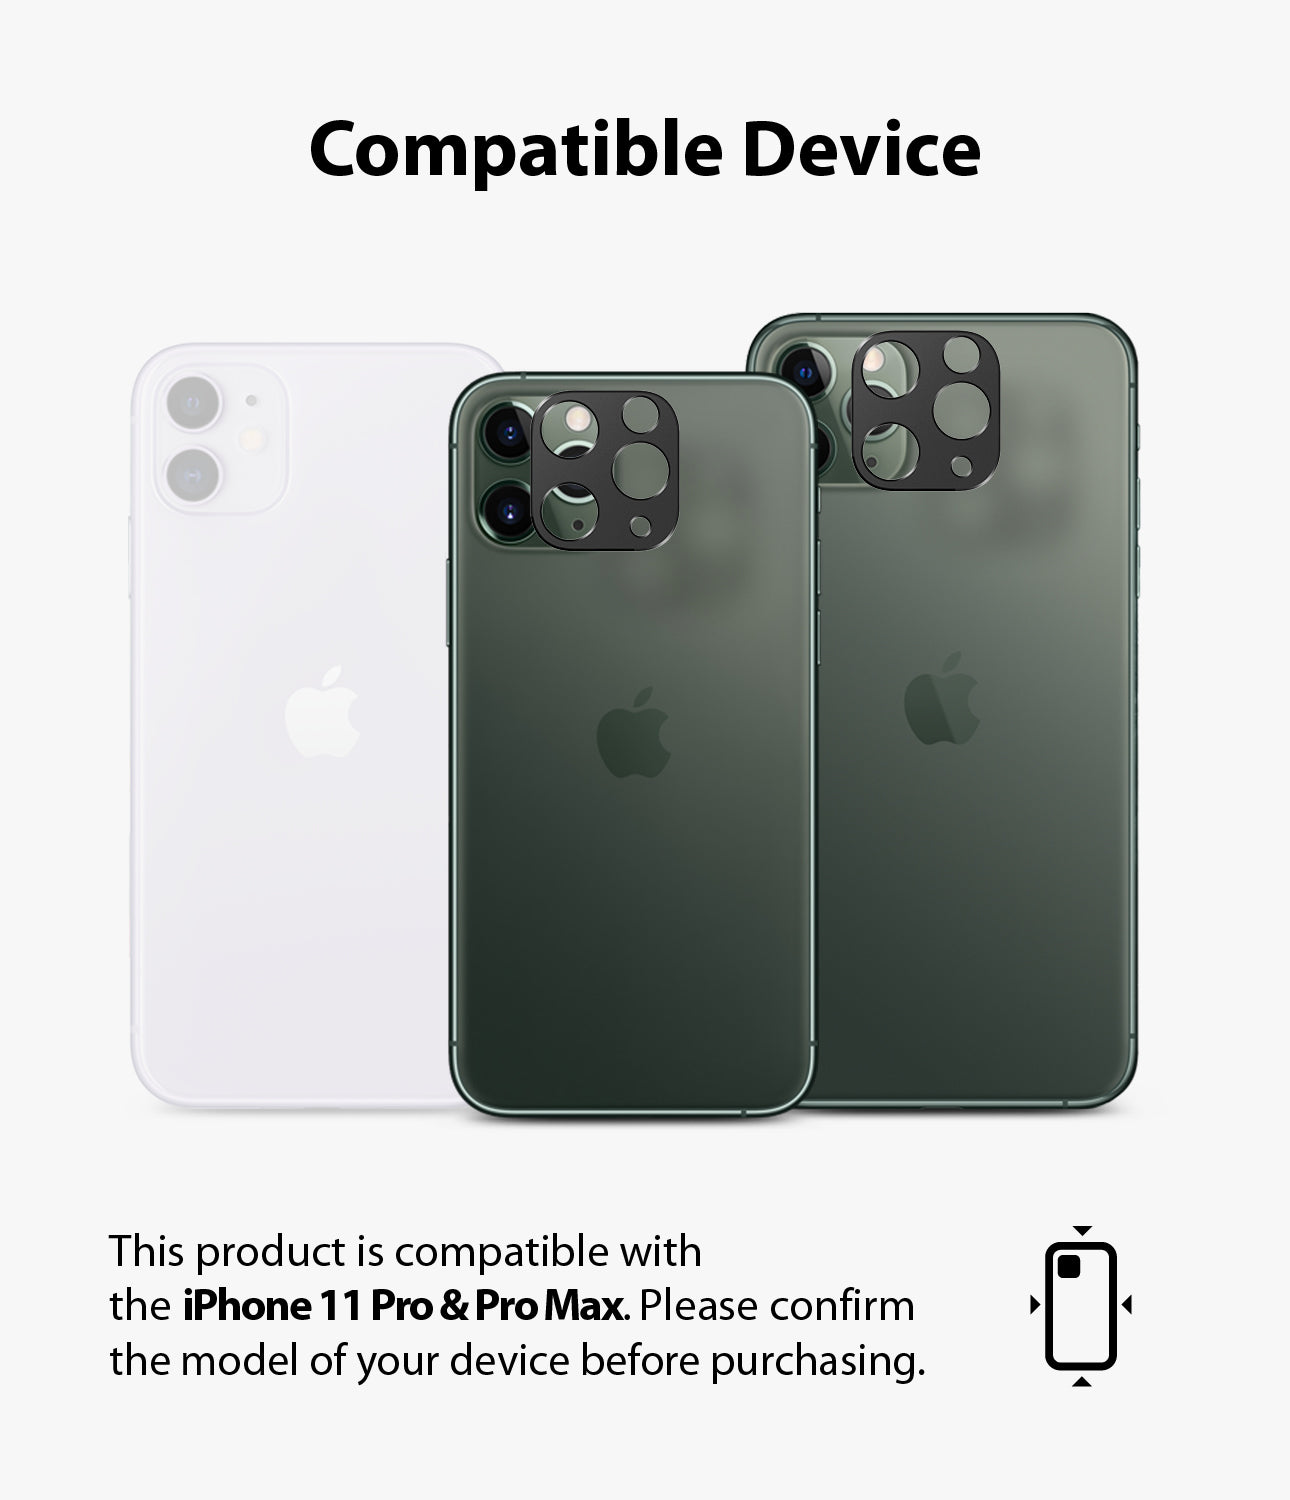 compaitlble with iphone 11 pro / iphone 11 pro max pro max